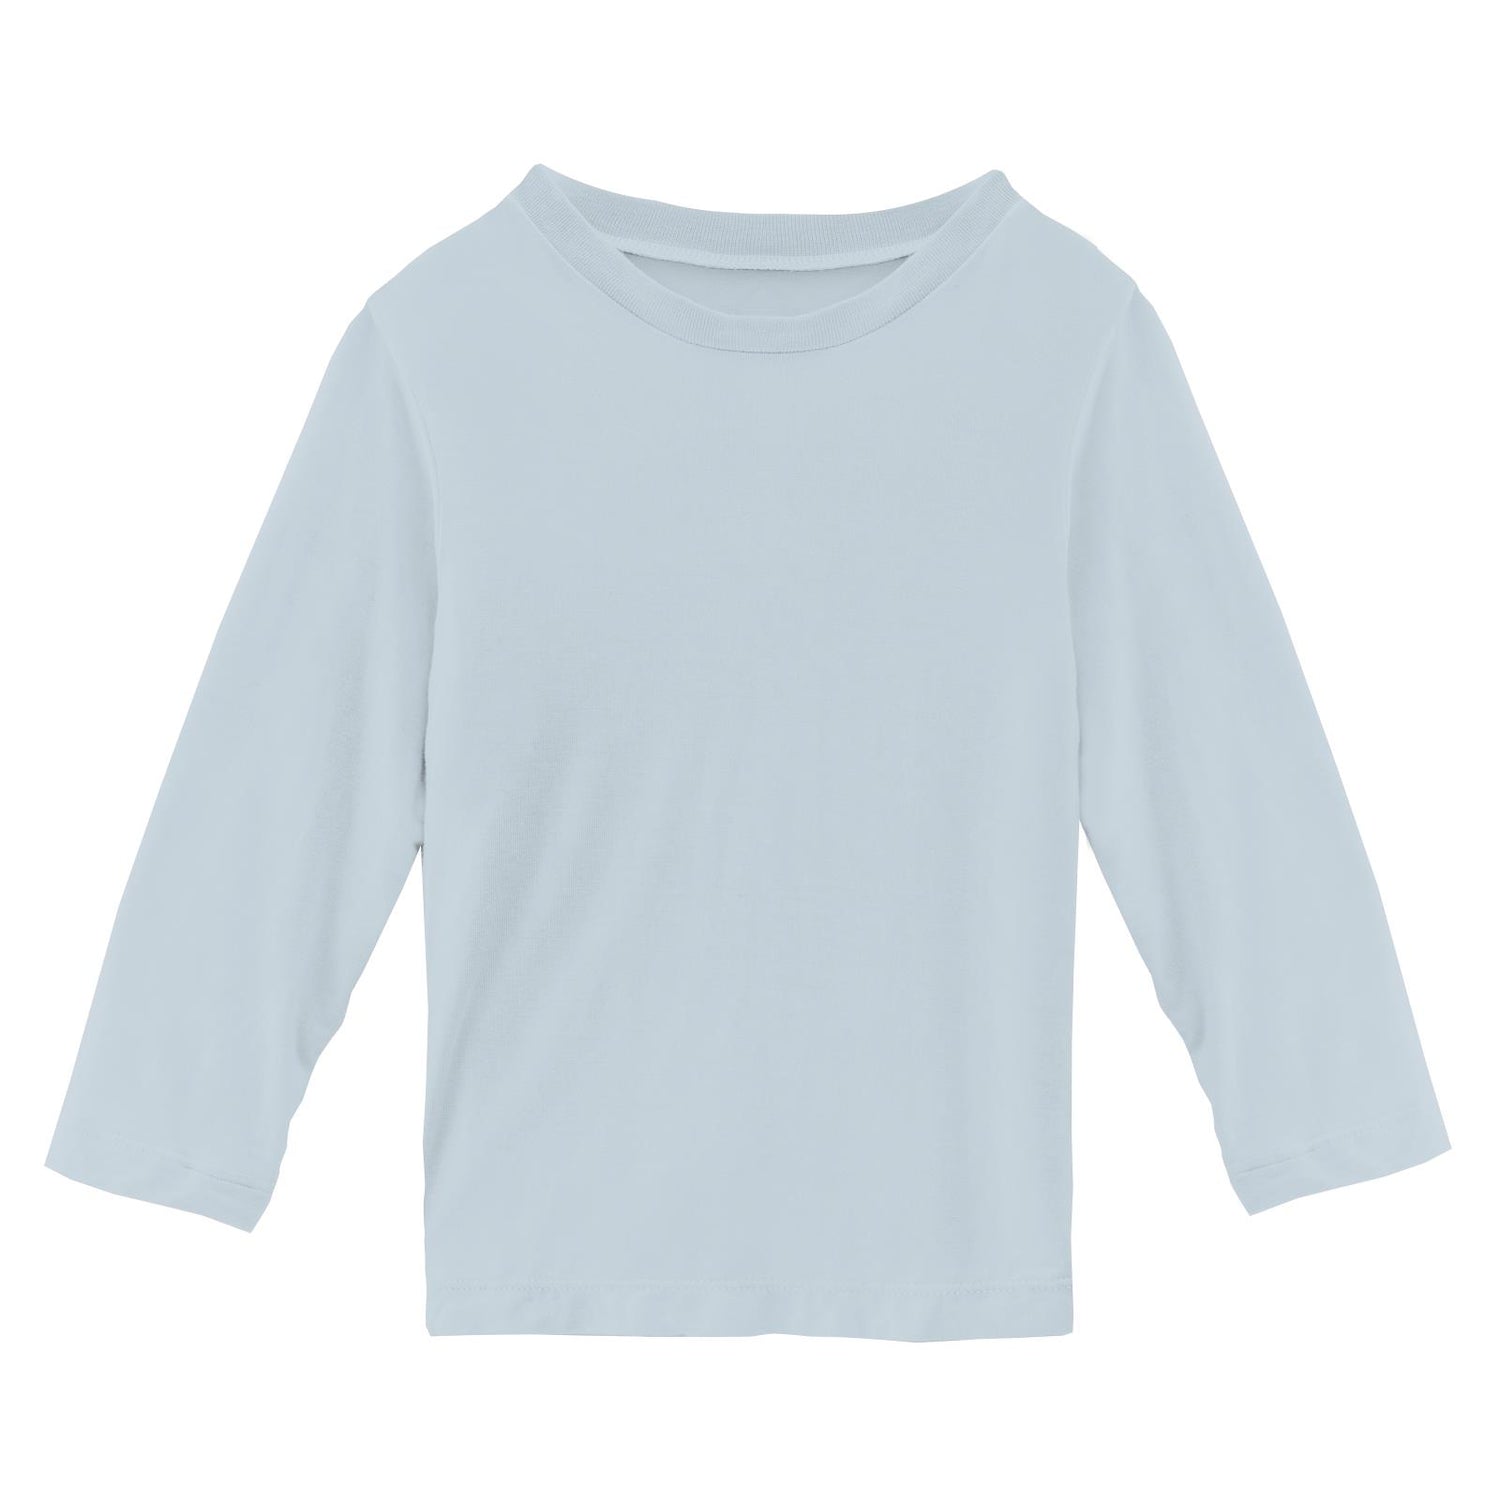 Long Sleeve Crew Neck Tee in Illusion Blue